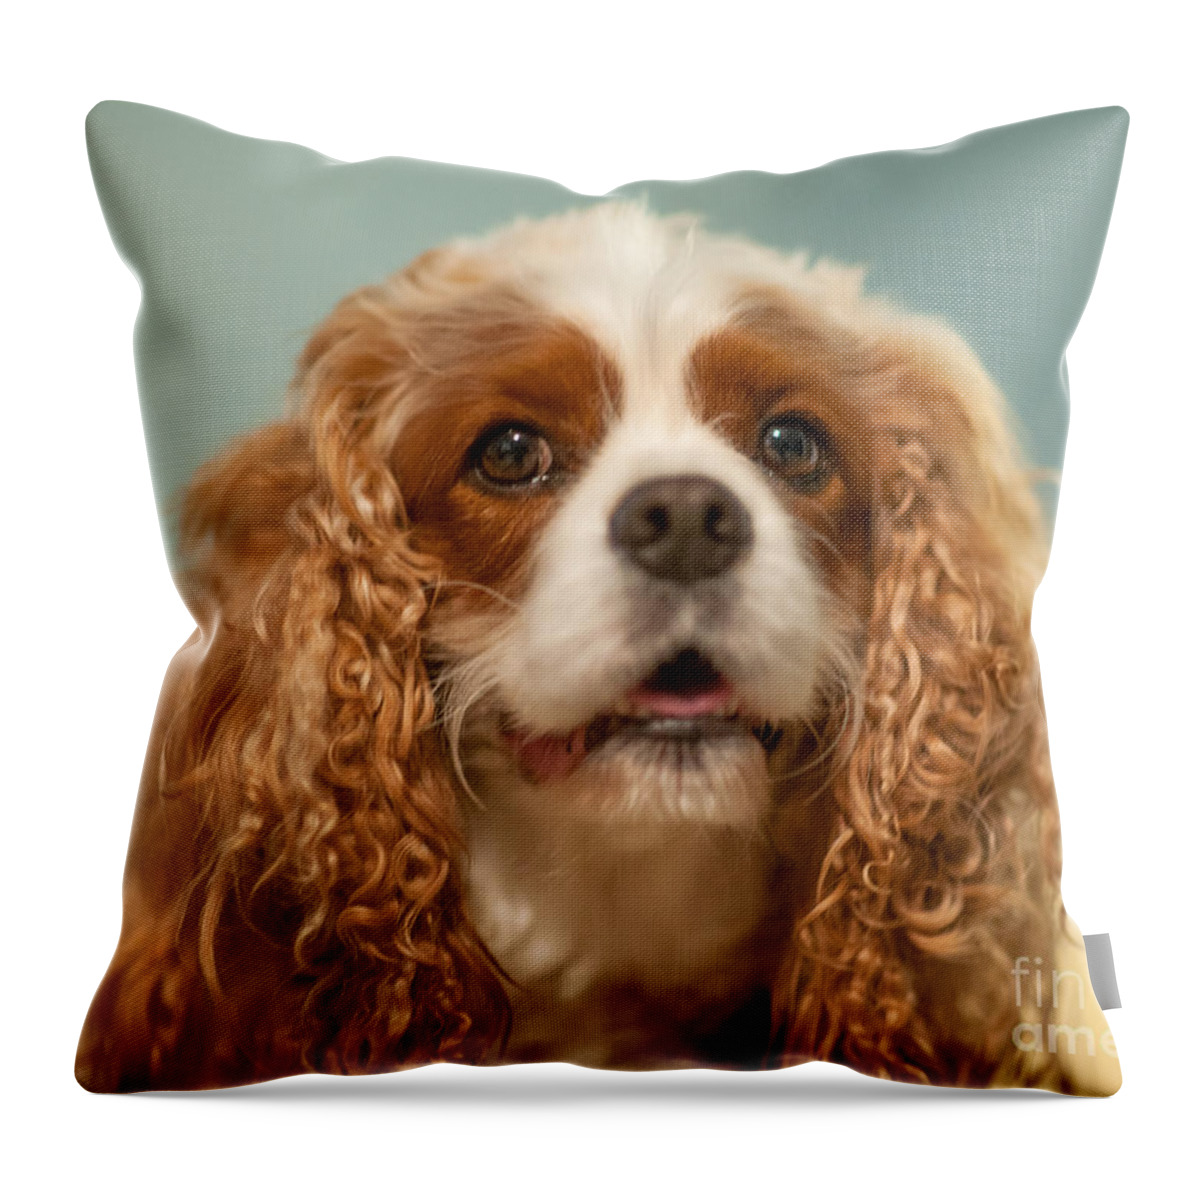 Cavalier King Charles Spaniel Throw Pillow featuring the photograph Cavalier Blenheim by Dale Powell